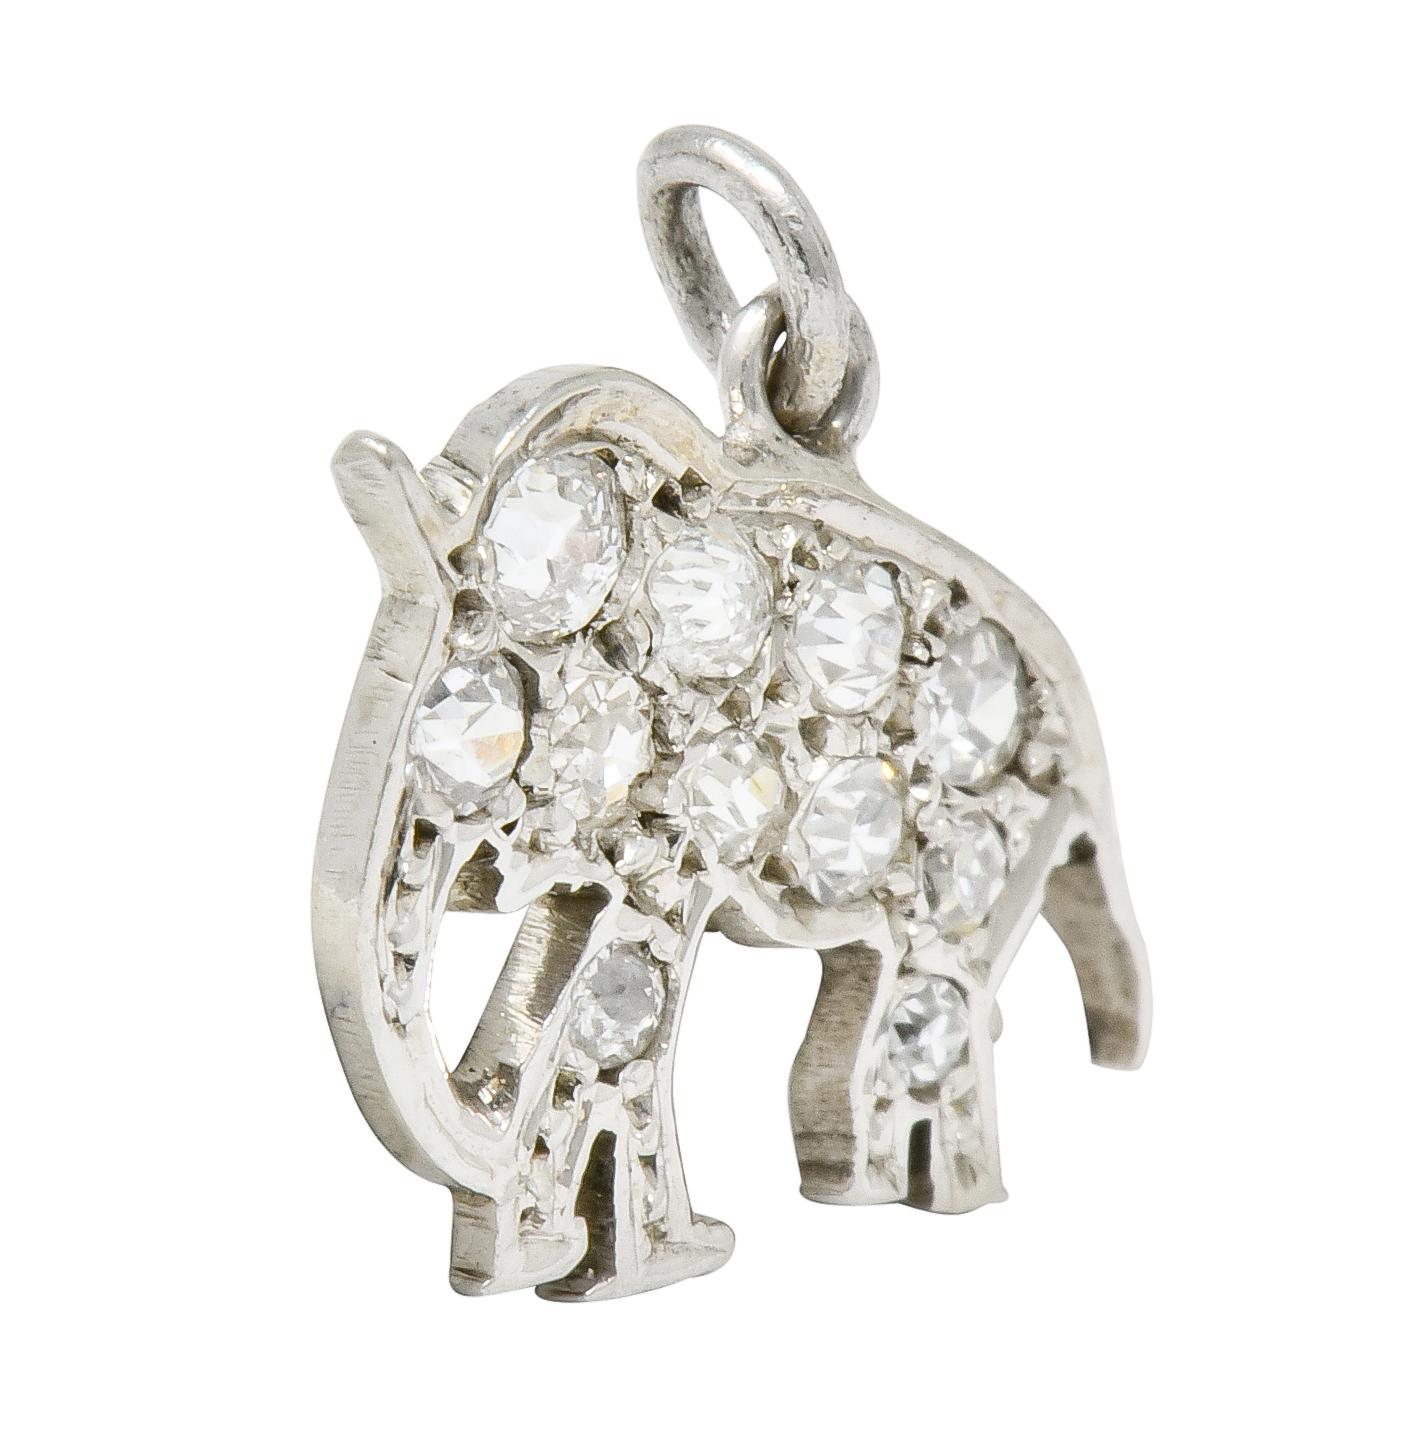 Charm designed as a stylized Indian elephant

Pavé set throughout by old European cut diamonds weighing in total approximately 0.30 carat; eye-clean and white

Tested as platinum

Circa: 1930s

Measures: 1/2 x 1/2 inch (including jump ring